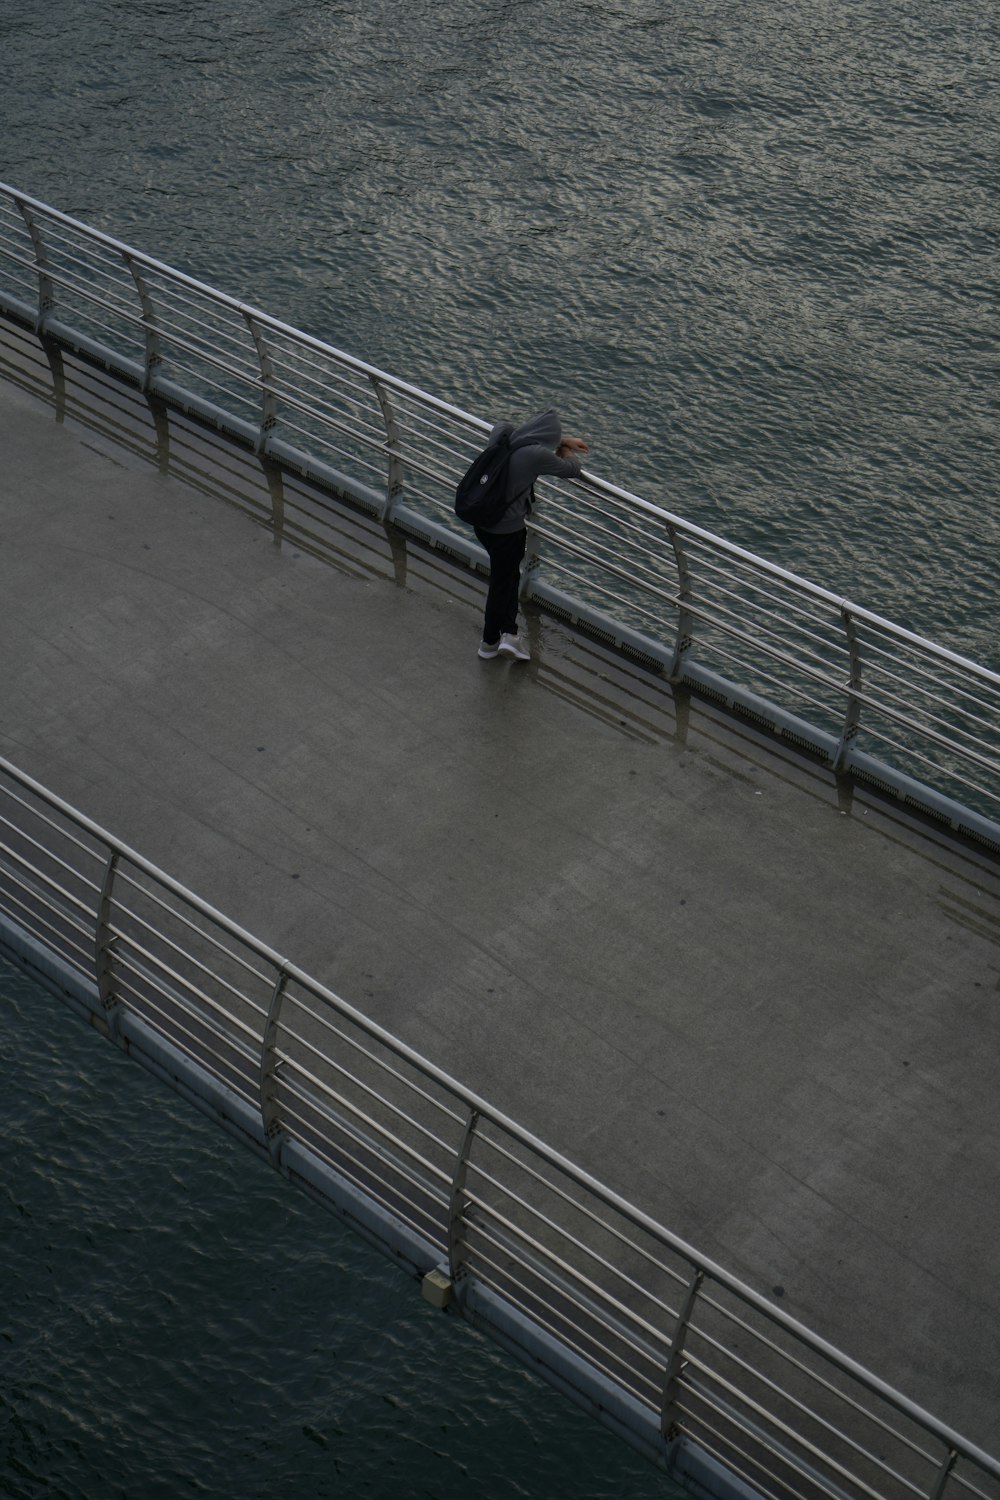 a man is skateboarding on a bridge over the water